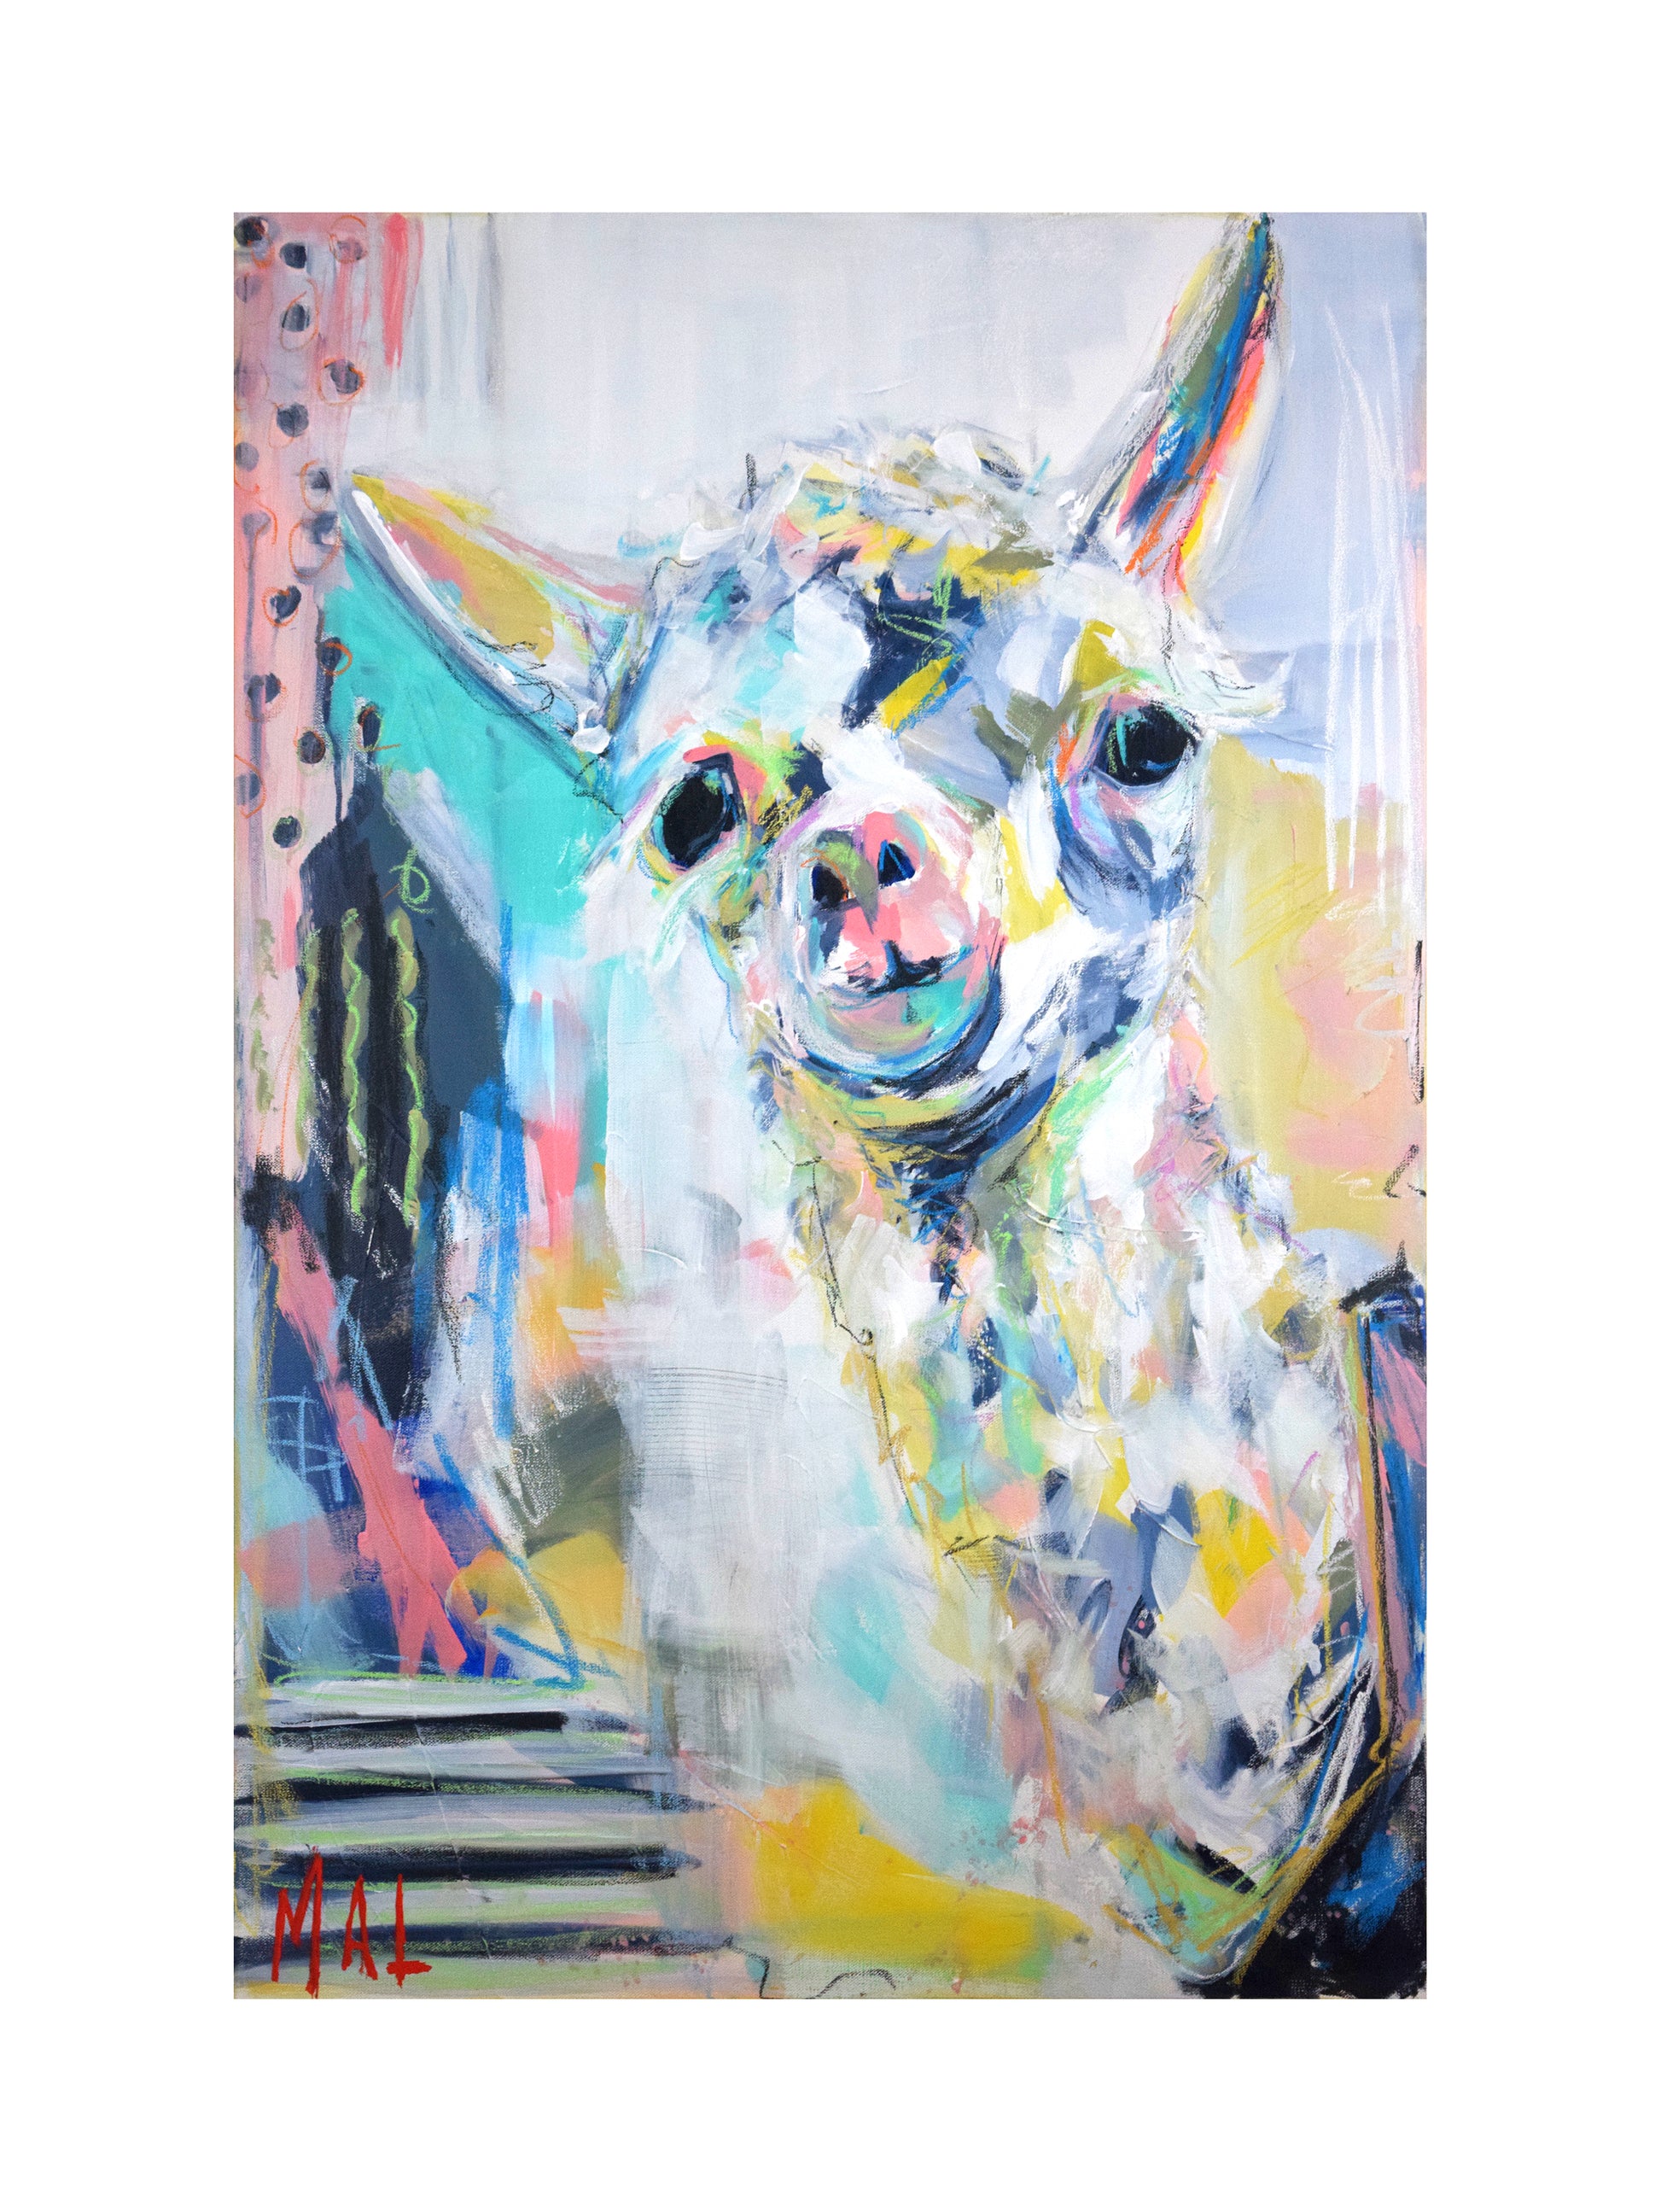 "Pearly June" Print by Mallory Moye - 12 x 16 inches by Mallory Moye - K. A. Artist Shop